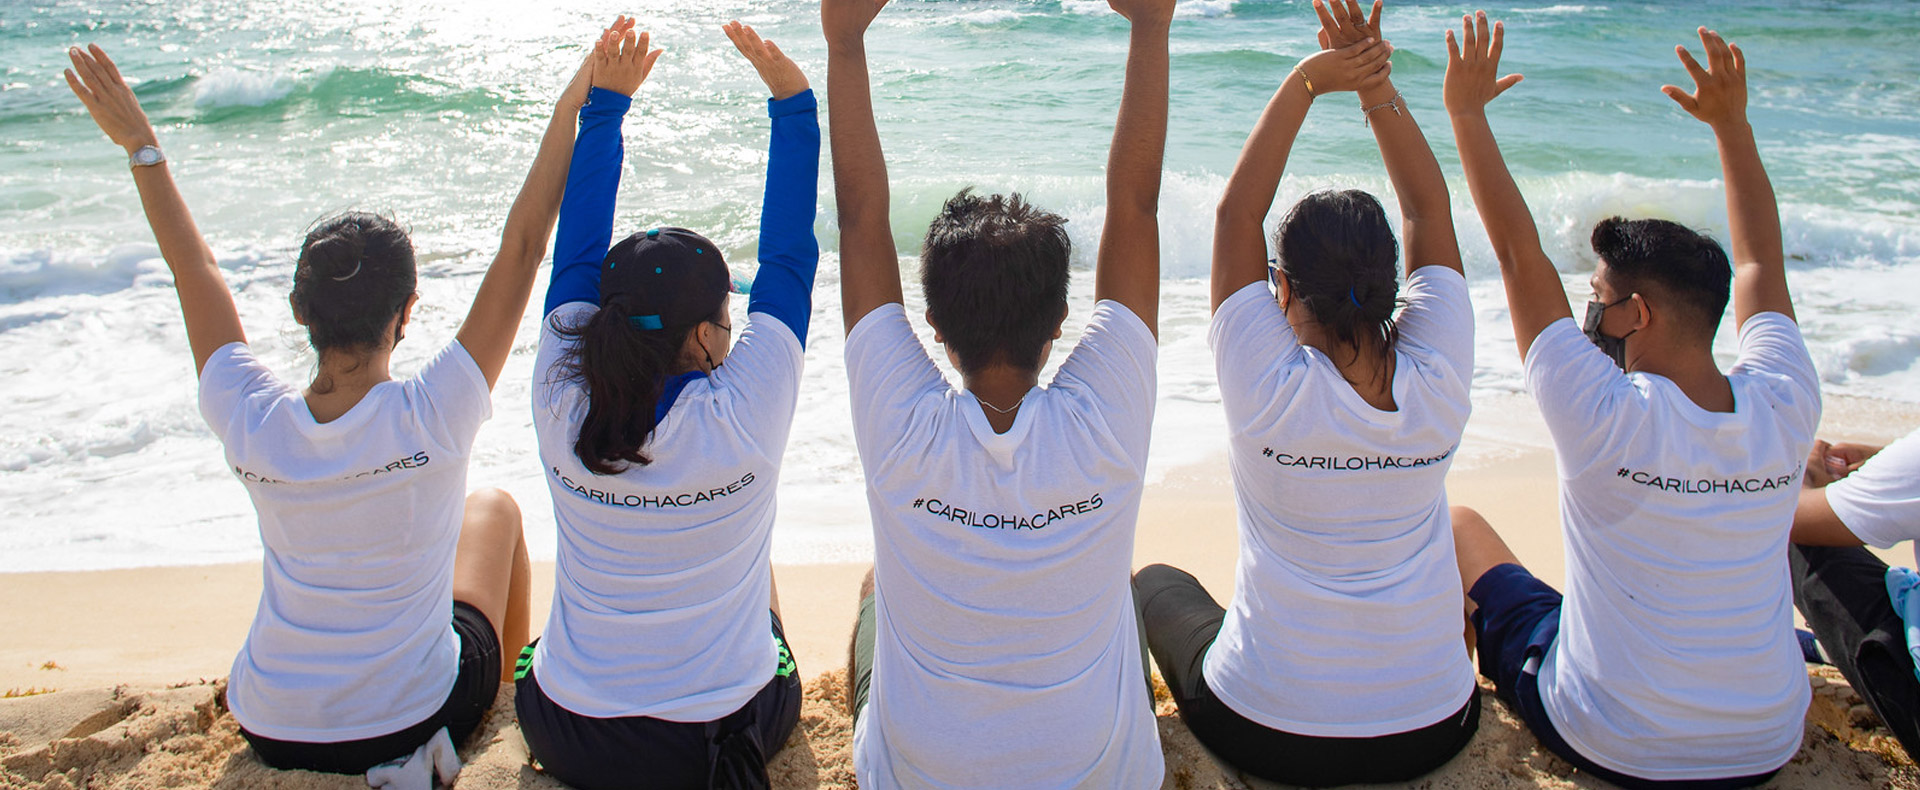 cariloha employees on the beach wearing cariloha cares t-shirts